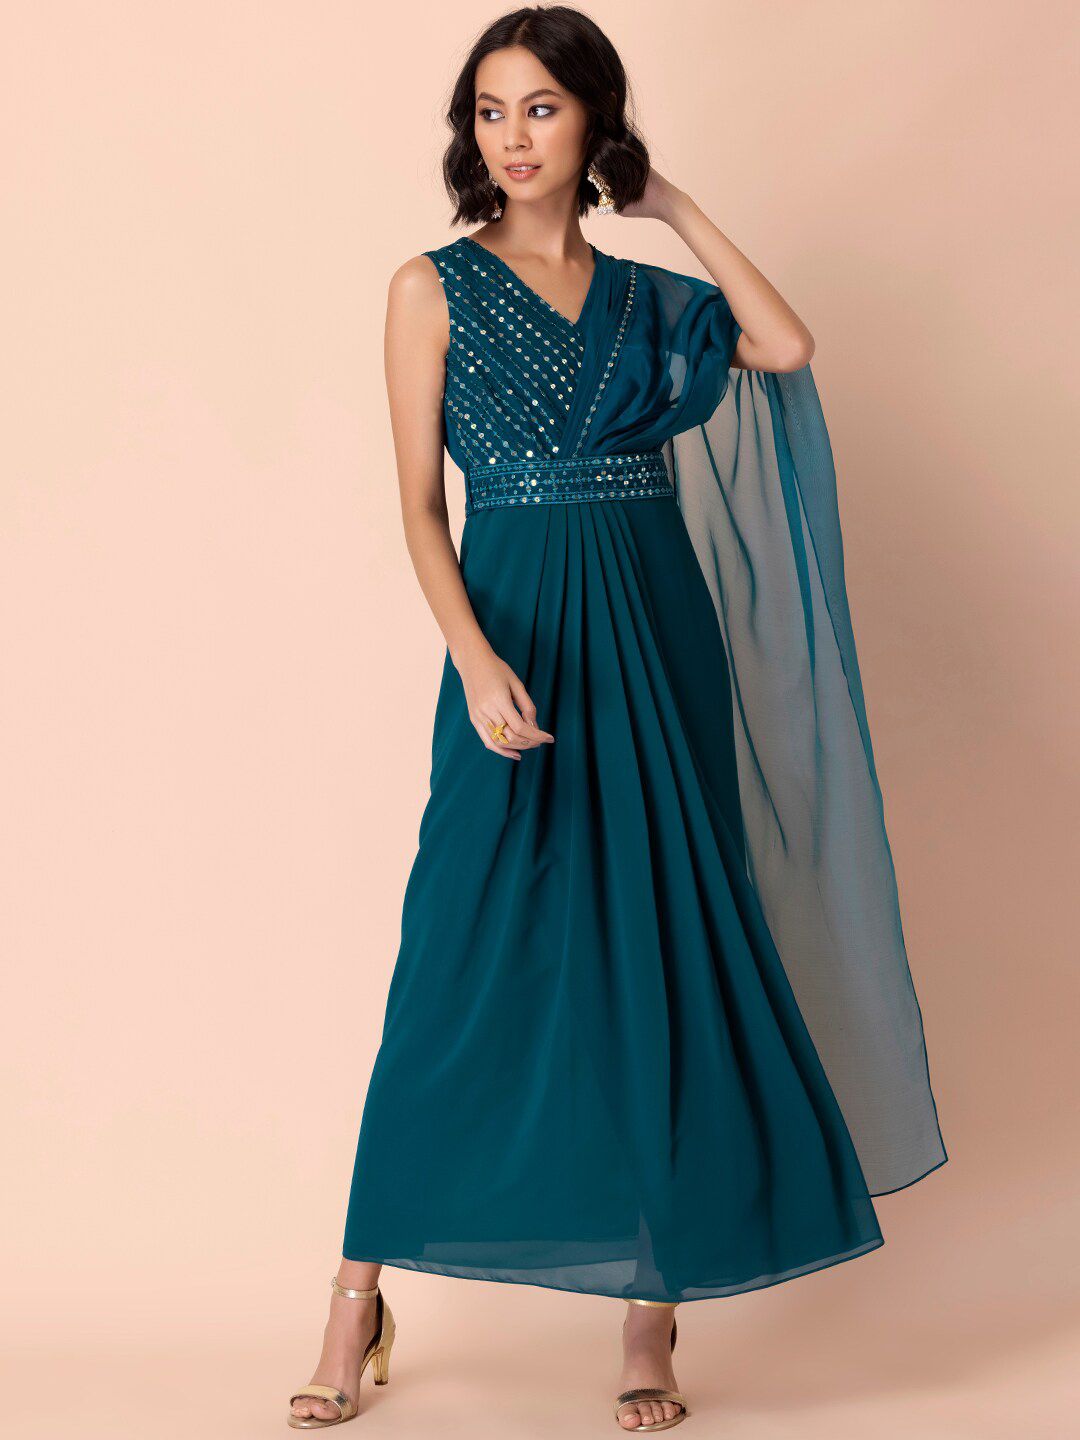 INDYA Teal Mirror Work Pre-Stitched with Attached Blouse & Belt Saree Price in India